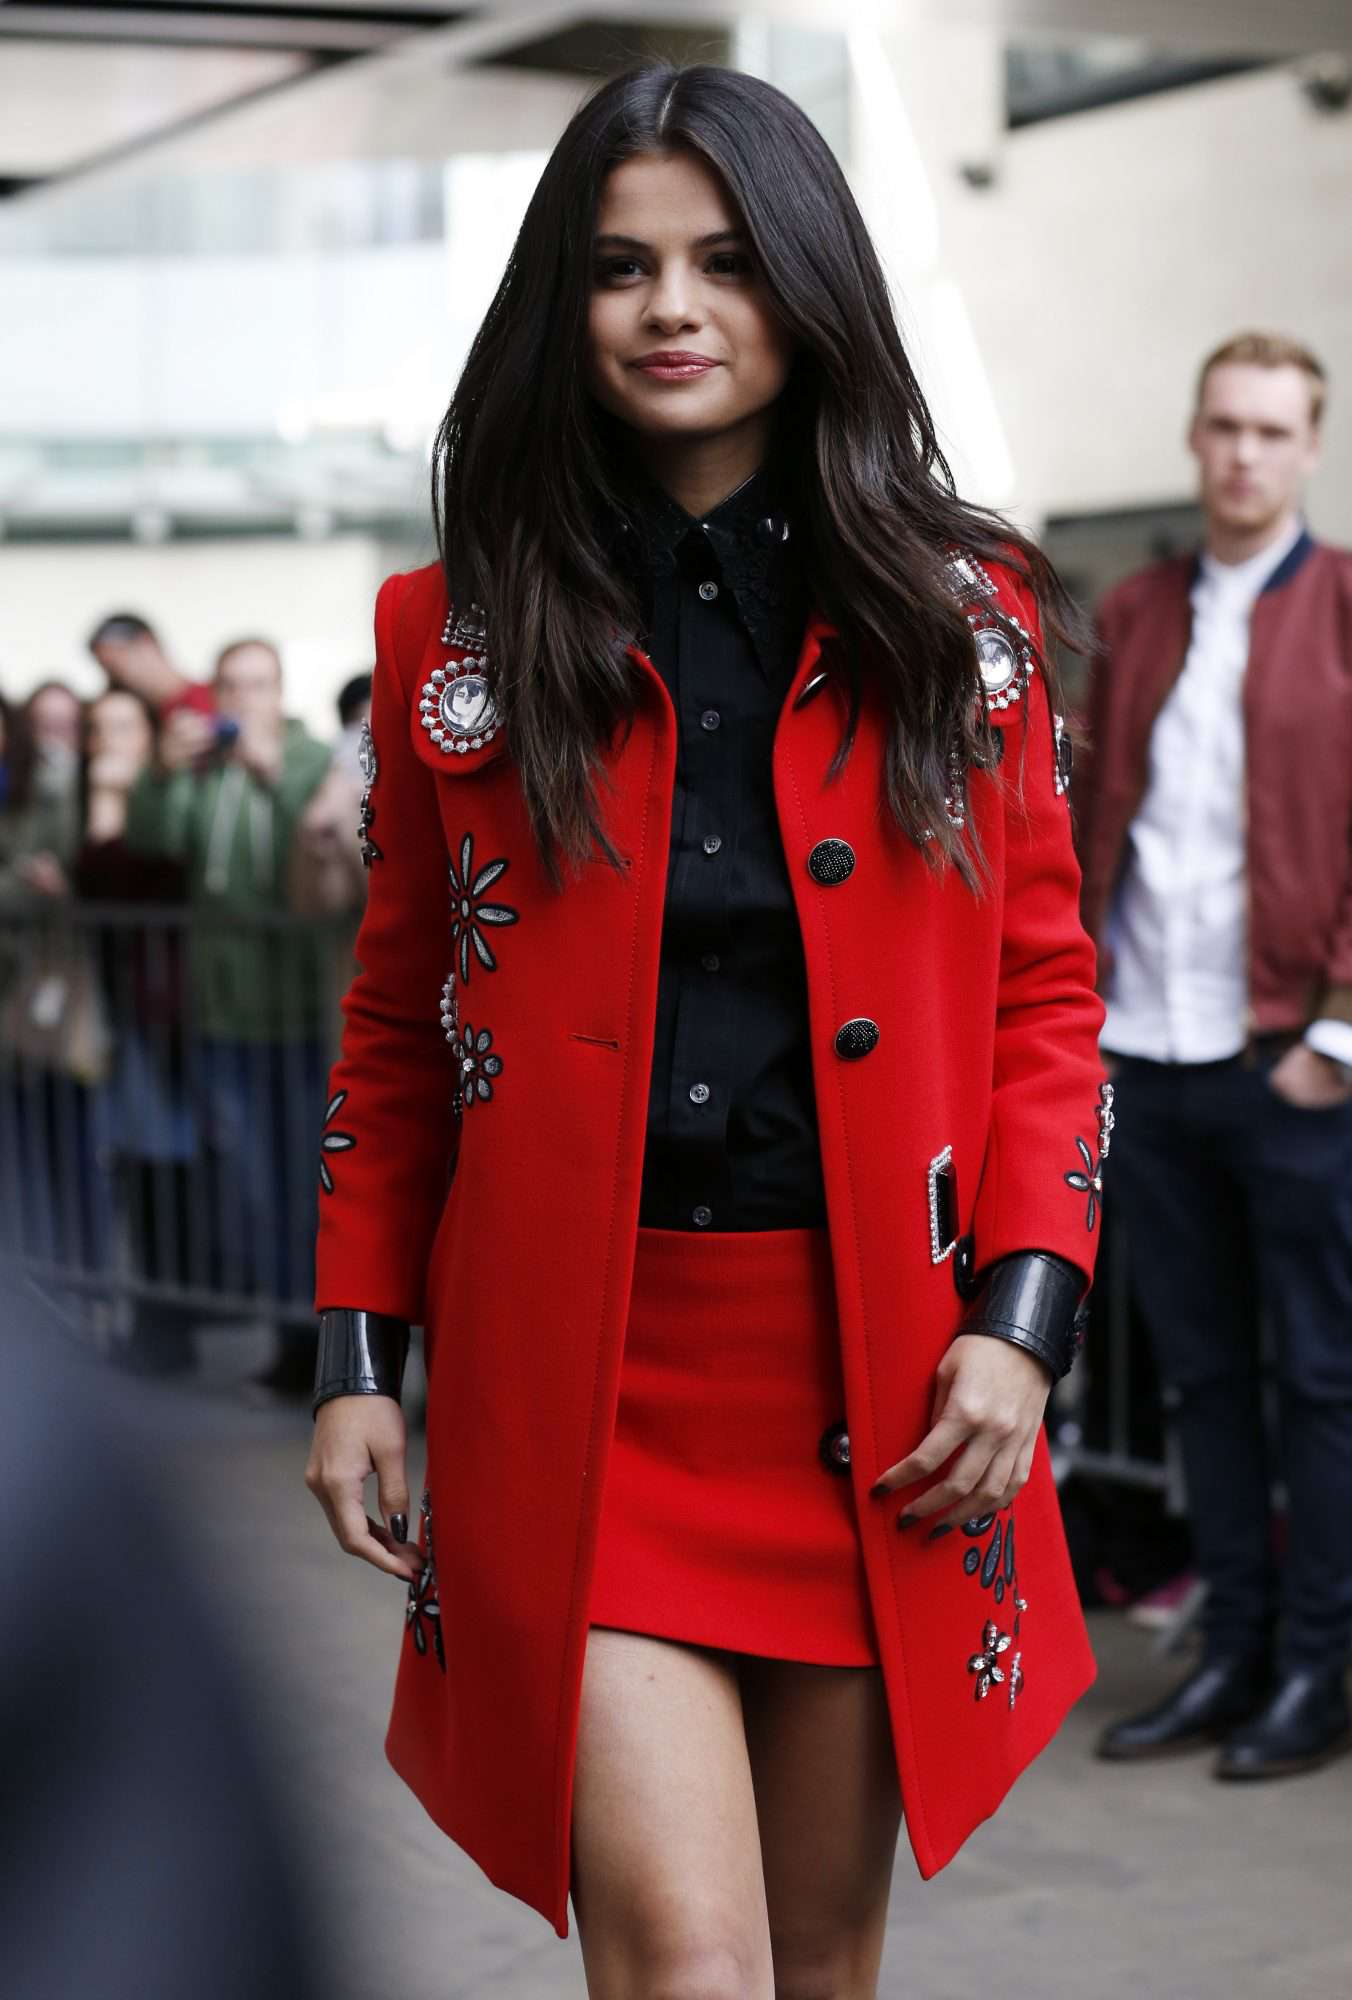 craig milham recommends Selena Gomez Red Leather